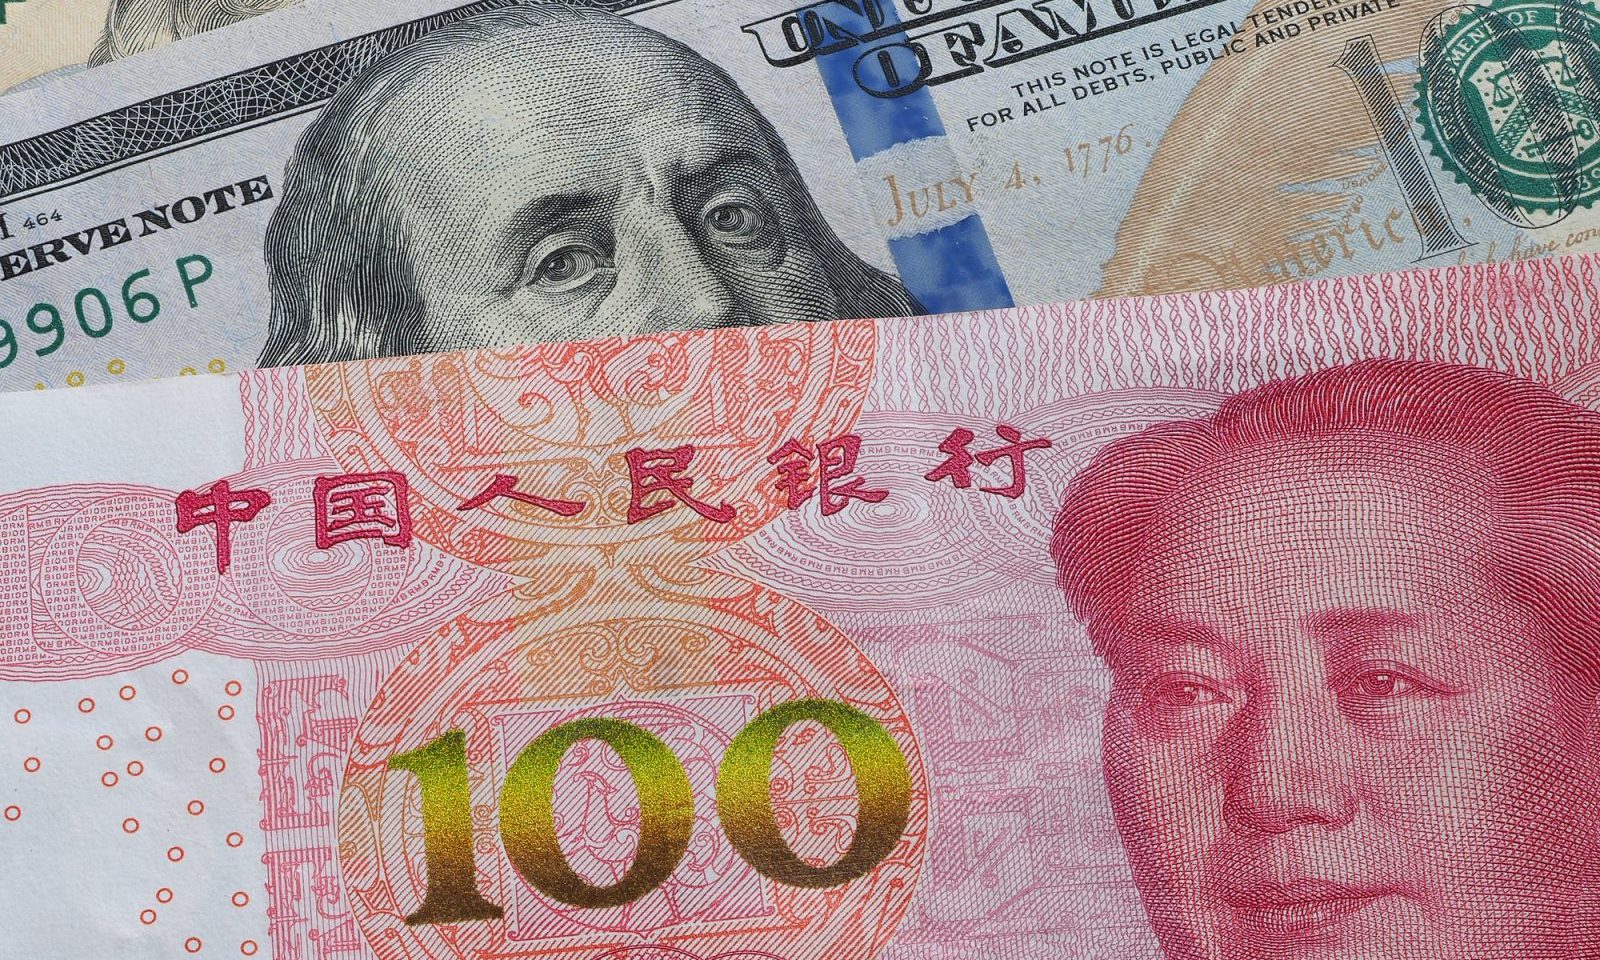 Awaiting crucial May producer prices, China’s yuan stable